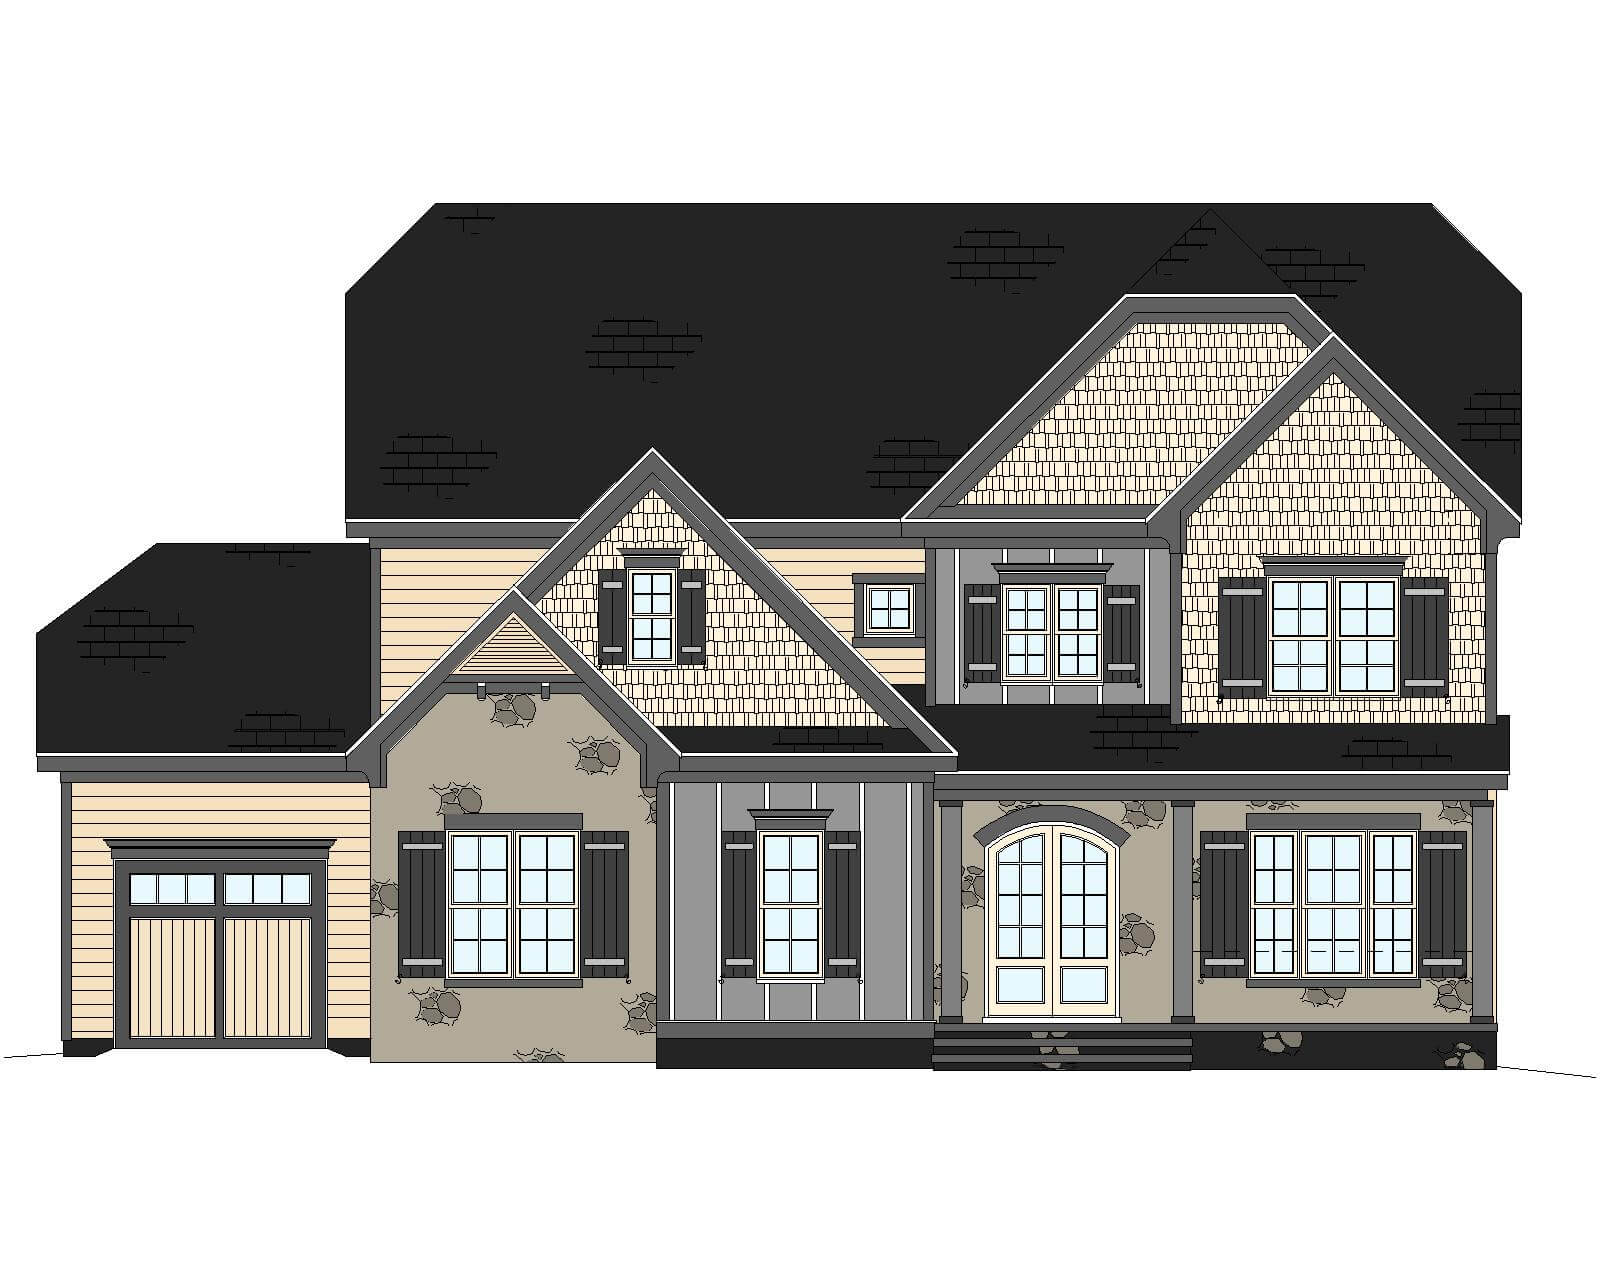 13 1849 My Home Floor Plans Front Elevation 